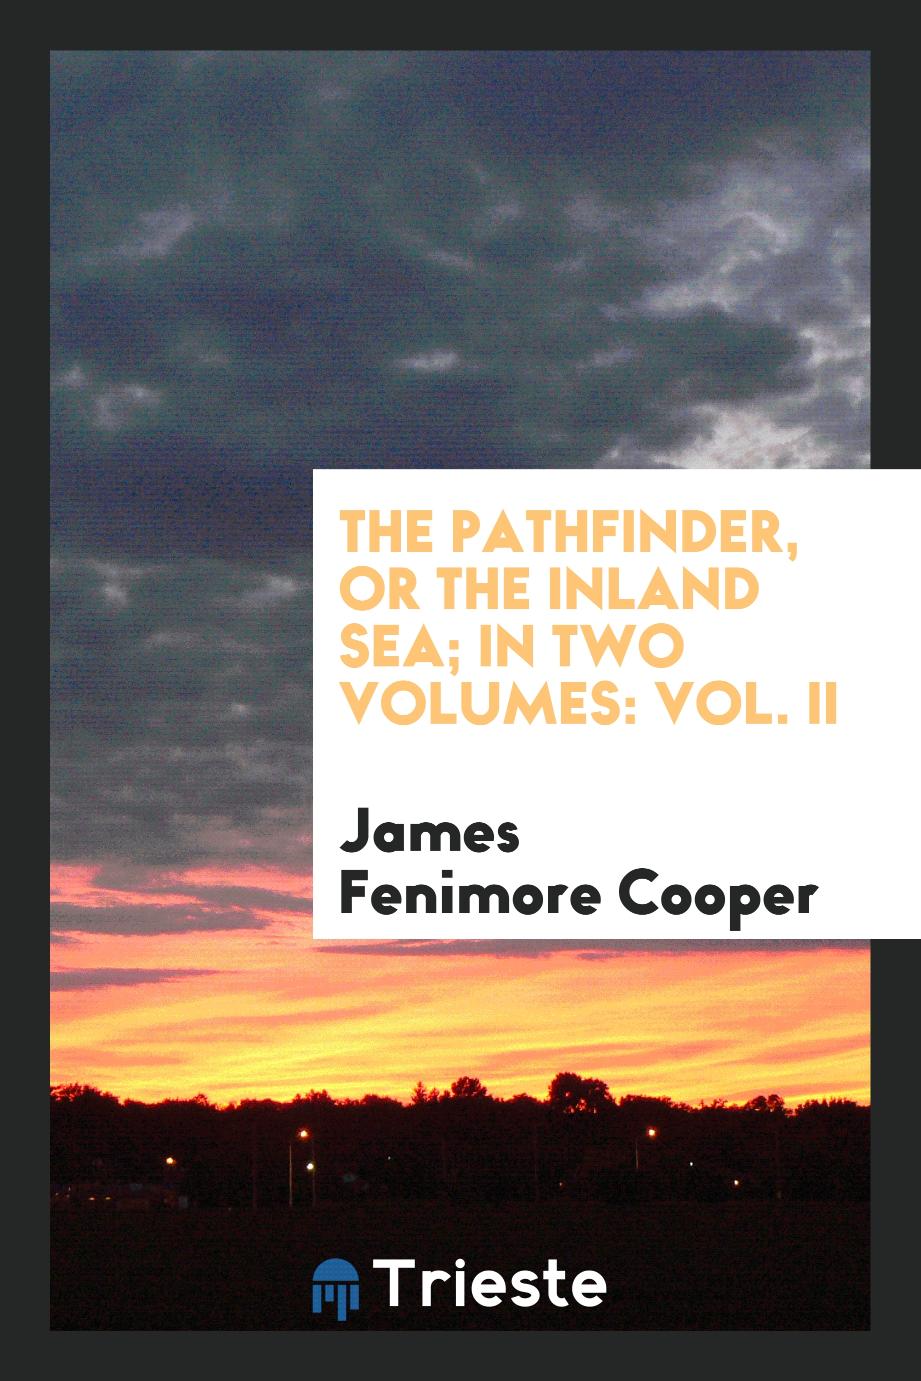 The Pathfinder, or the Inland Sea; in two volumes: Vol. II